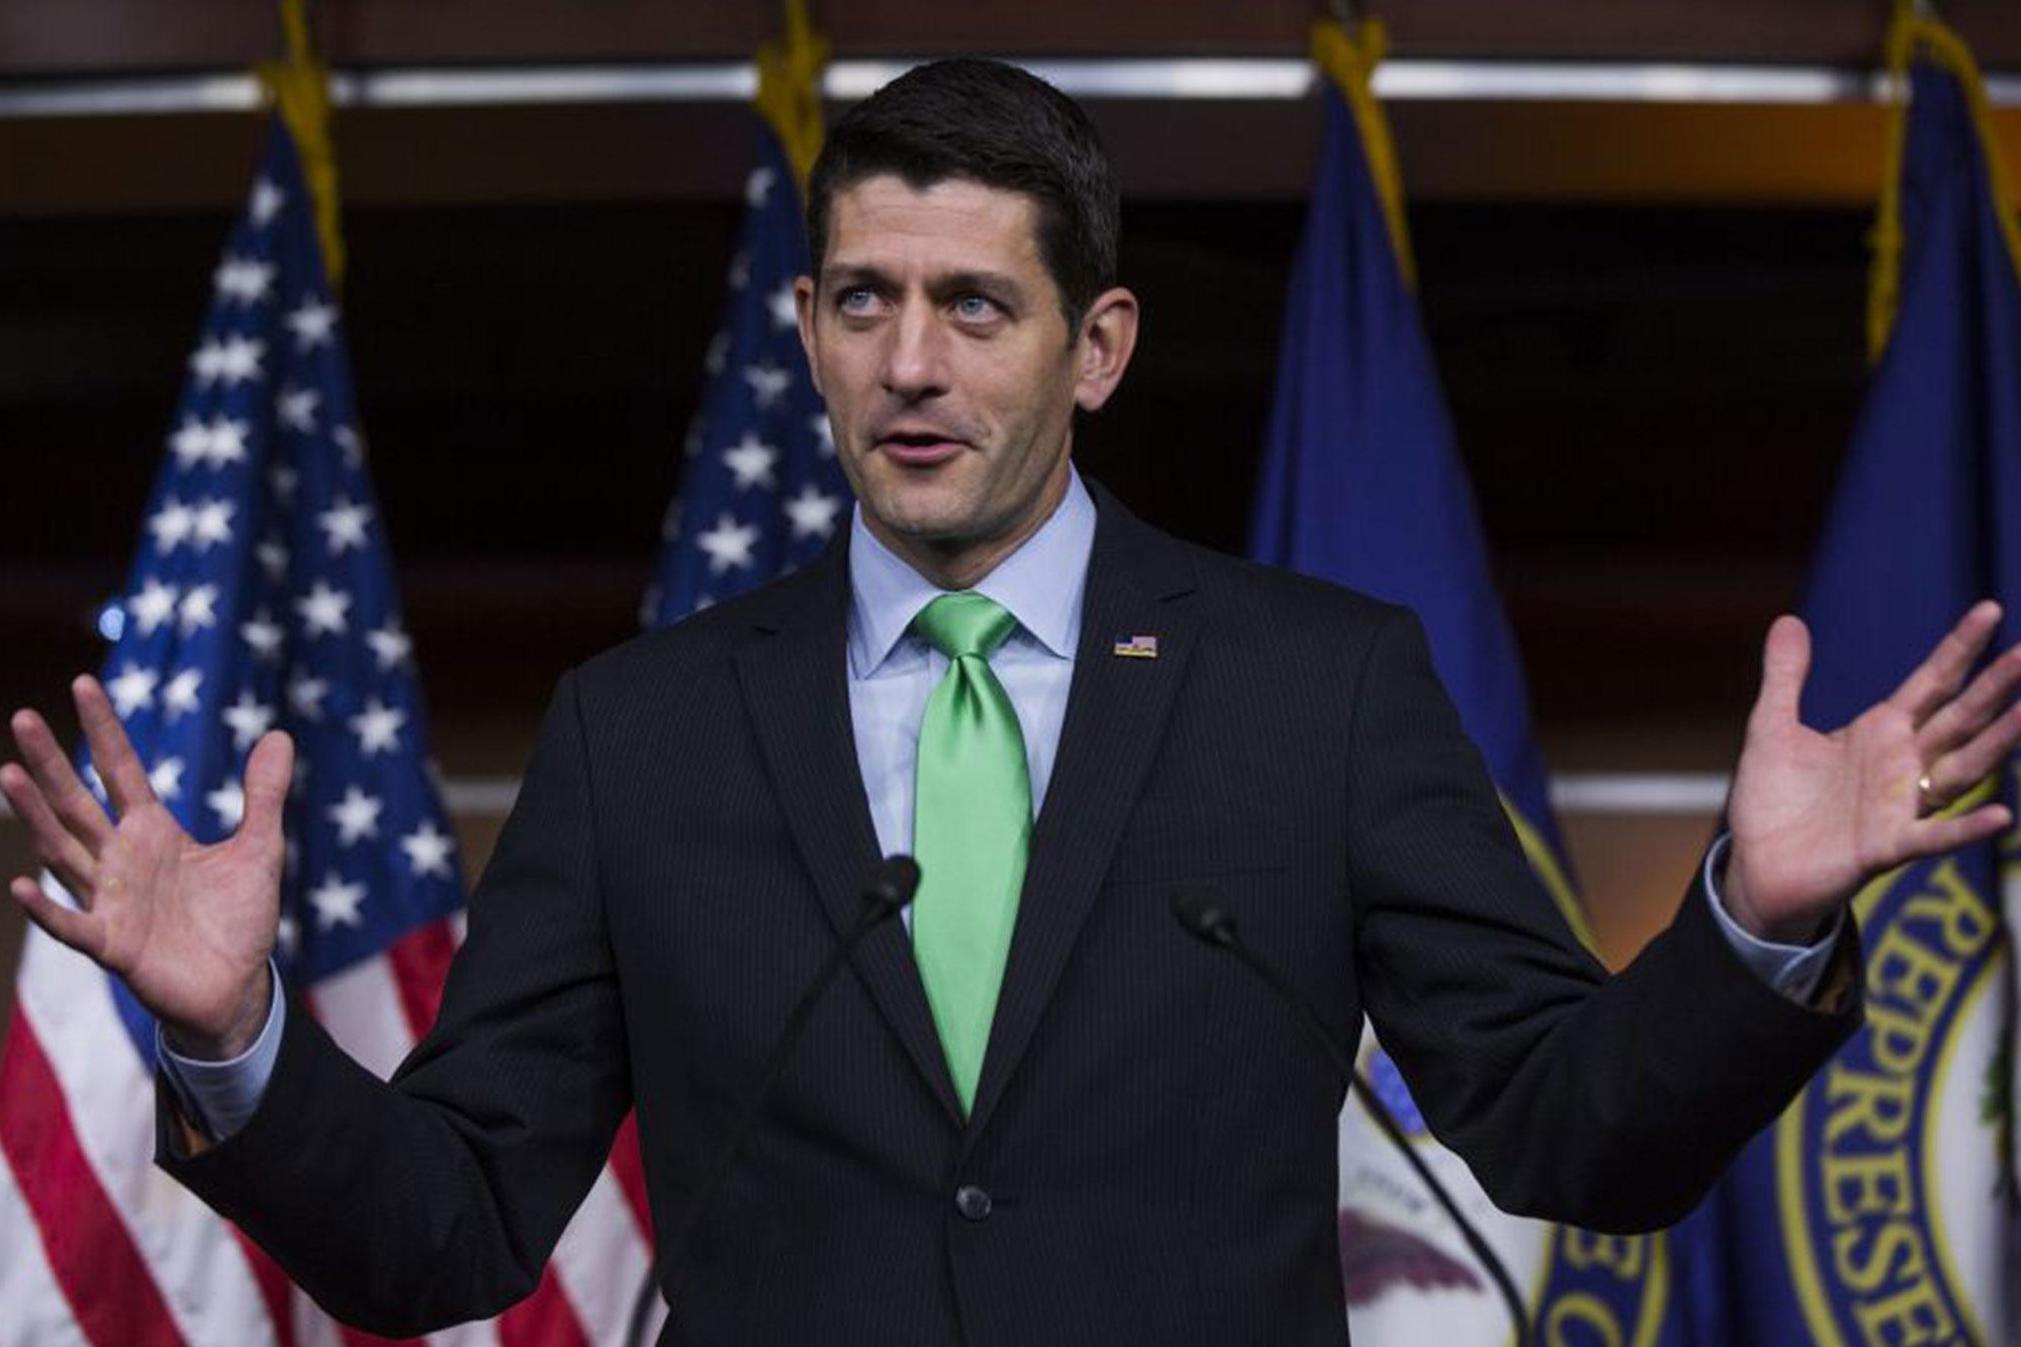 Mr Ryan's new plan is to focus on what Republicans - in general - stand for, as opposed to Mr Trump